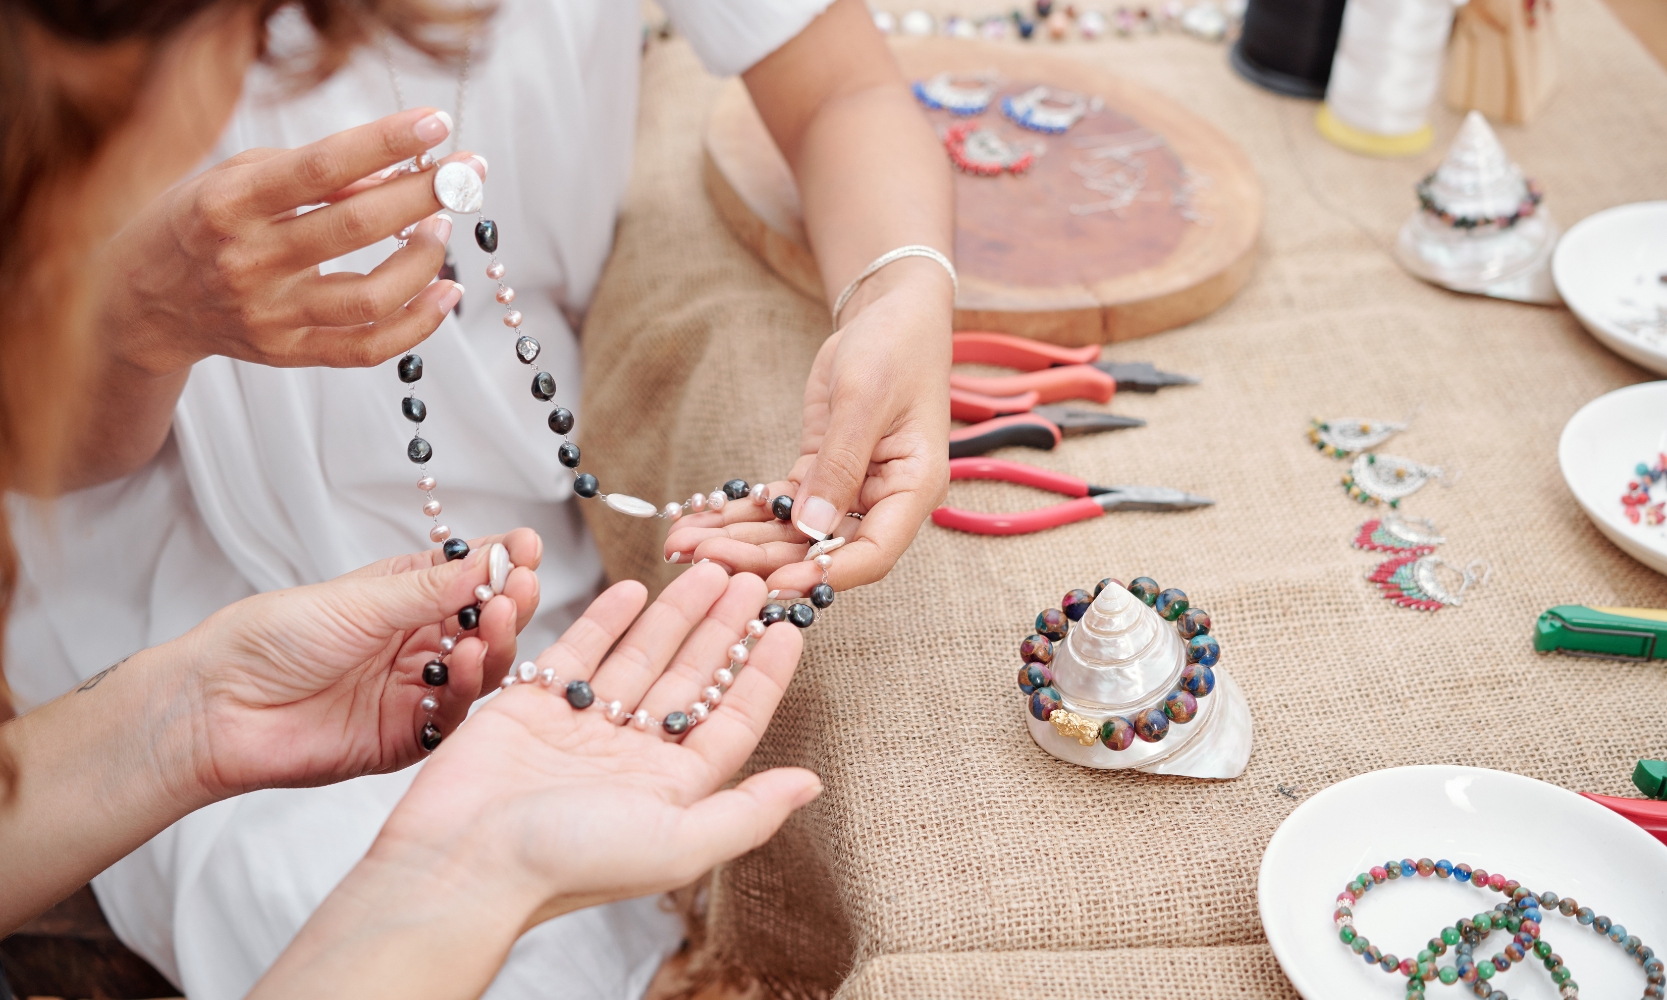 A close up image of two people jewelry making at an art workshop